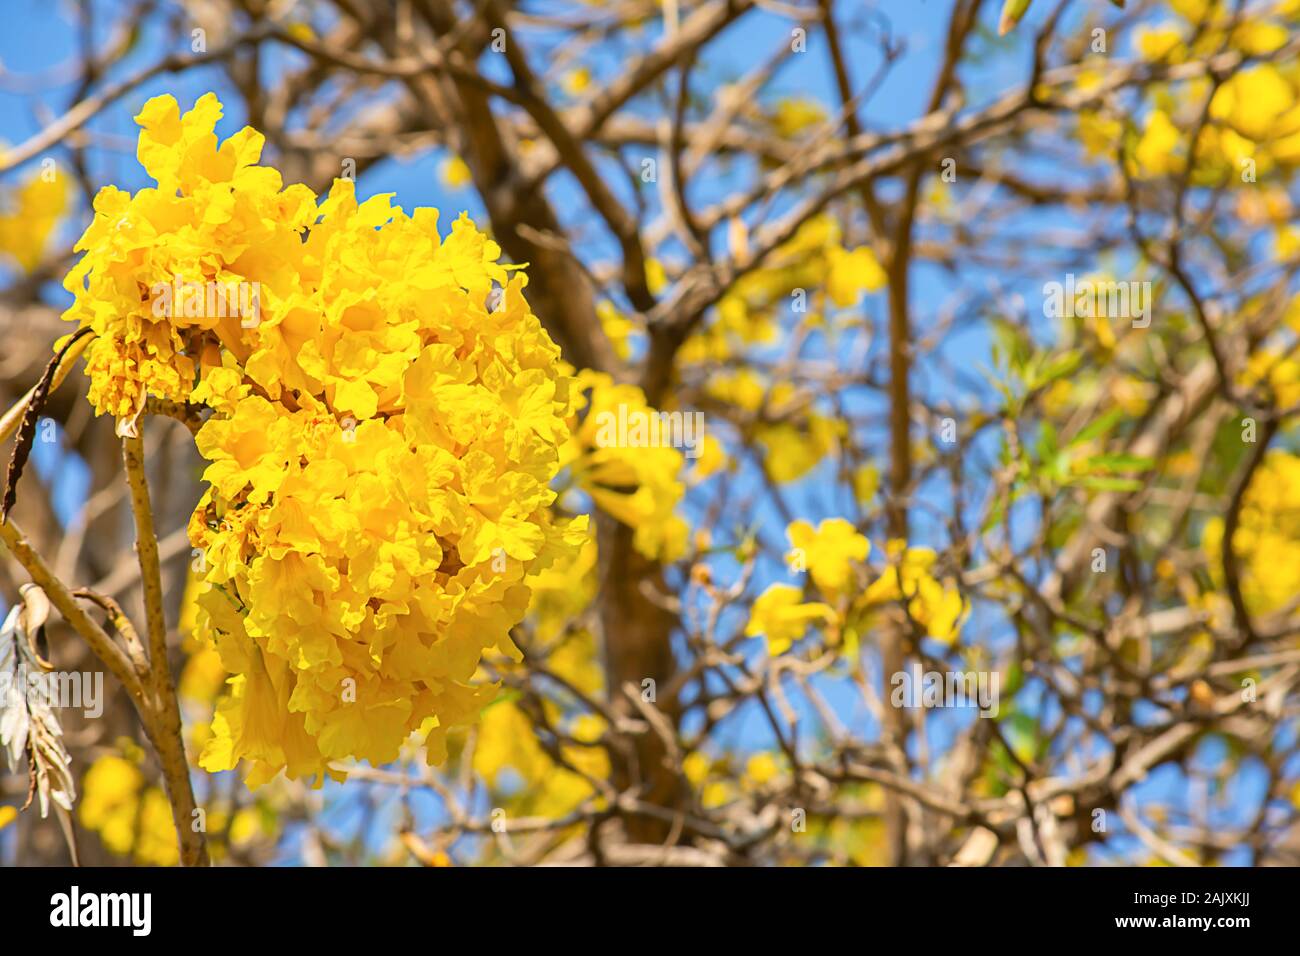 Bright yellow flowers or Peltophorum pterocarpum on the trees and the sky in the garden. Stock Photo